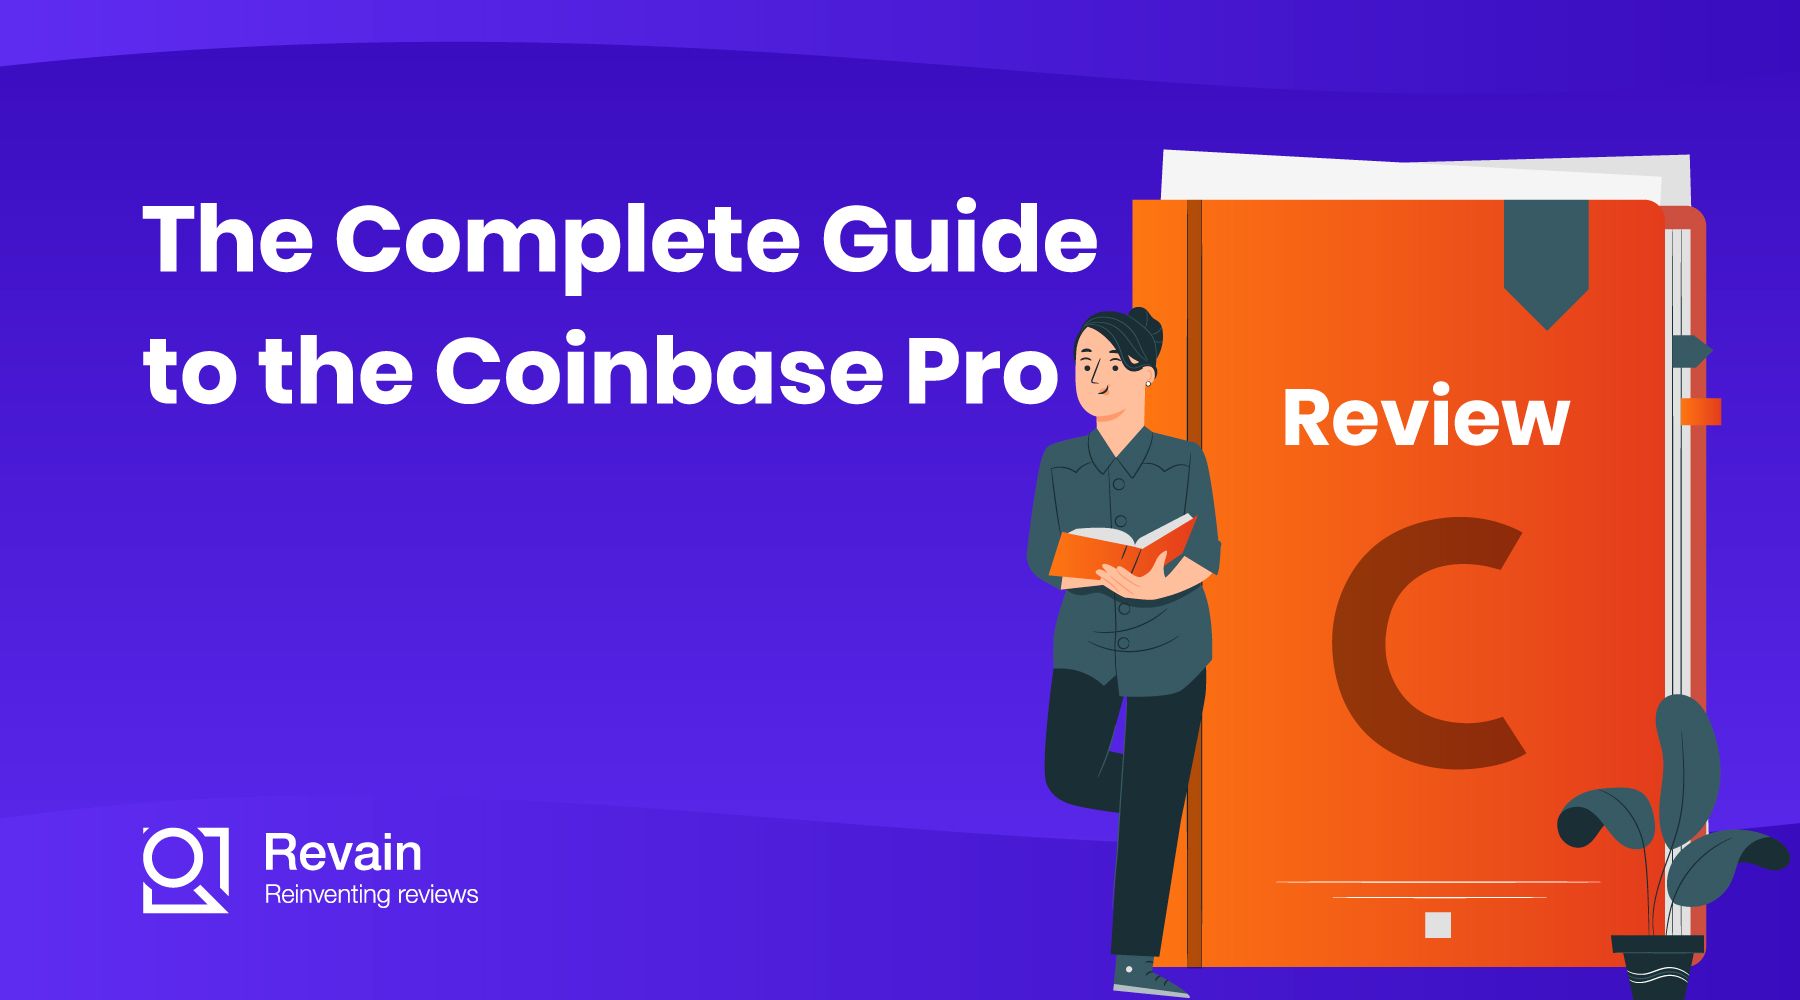 Article The Complete Guide to the Coinbase Pro Exchange